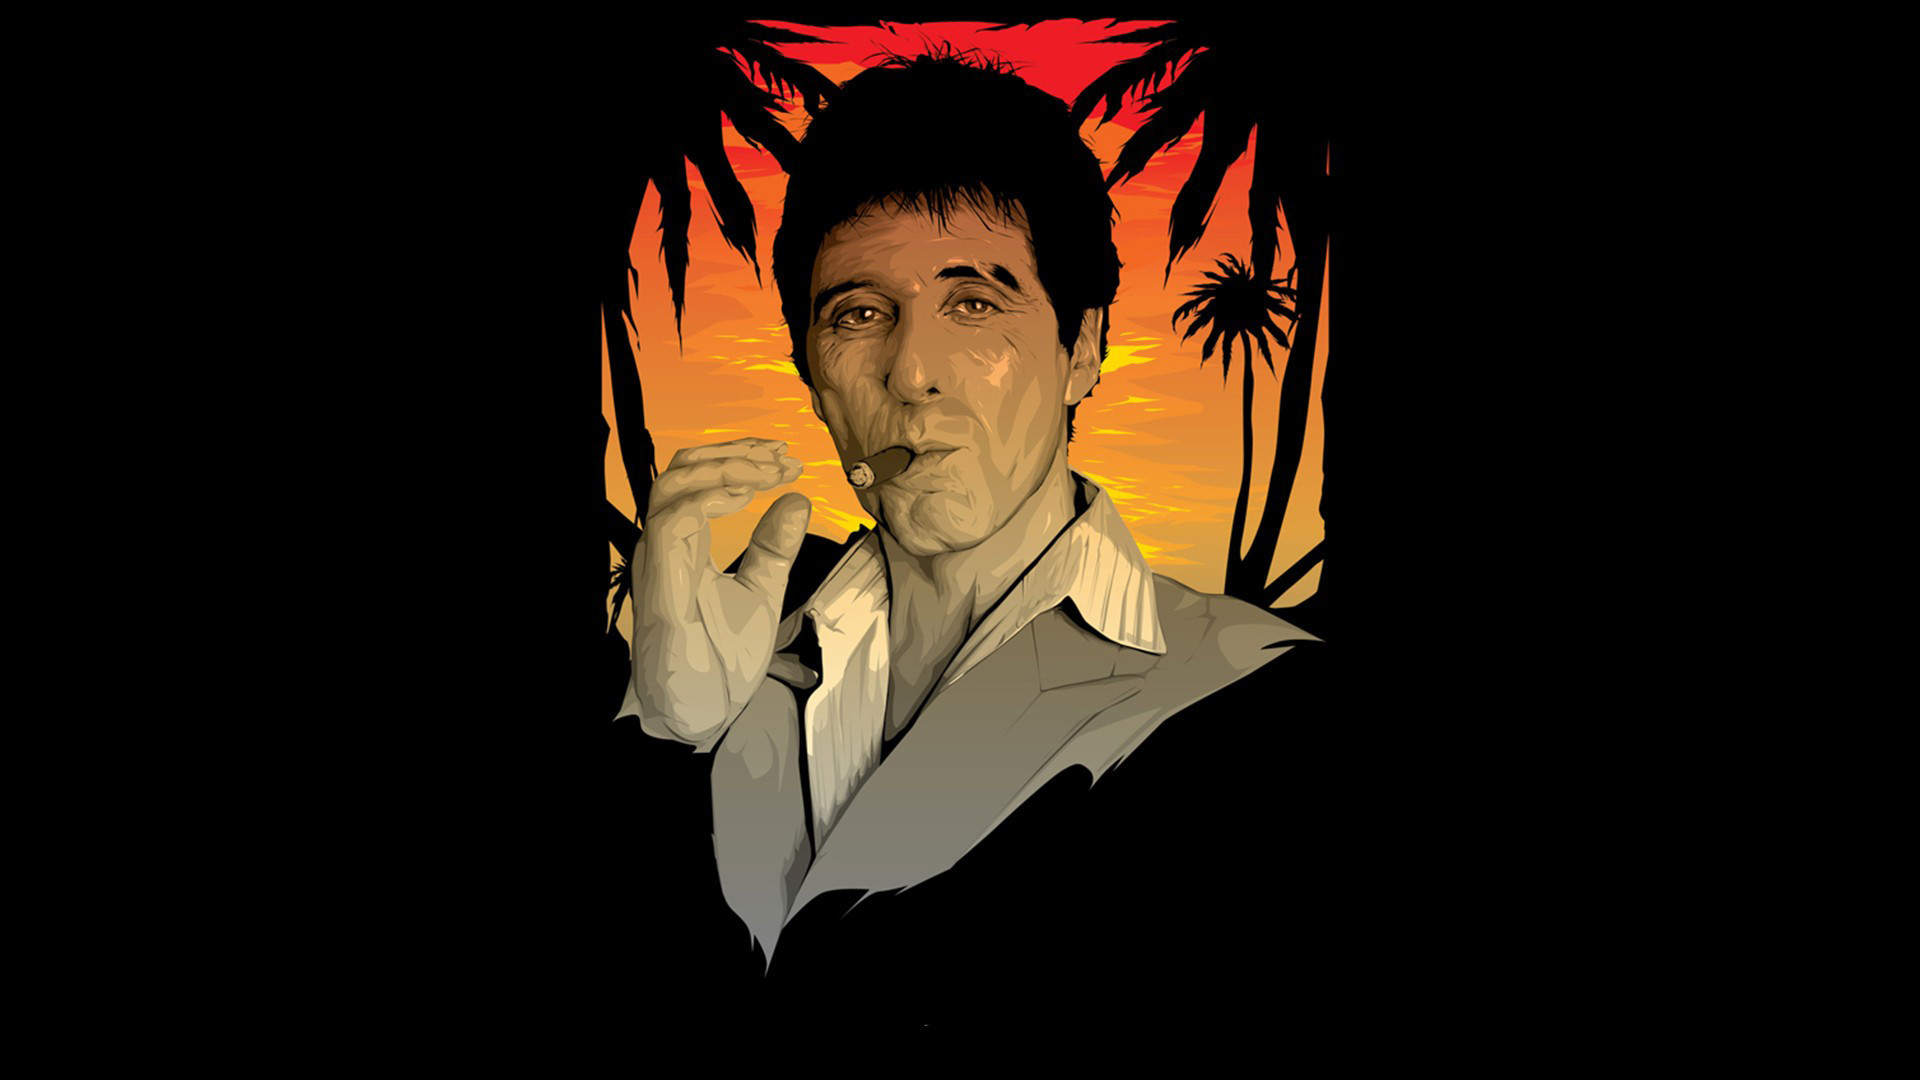 1920x1080  Scarface Full HD Wallpaper http://wallpapers-and-backgrounds.net/